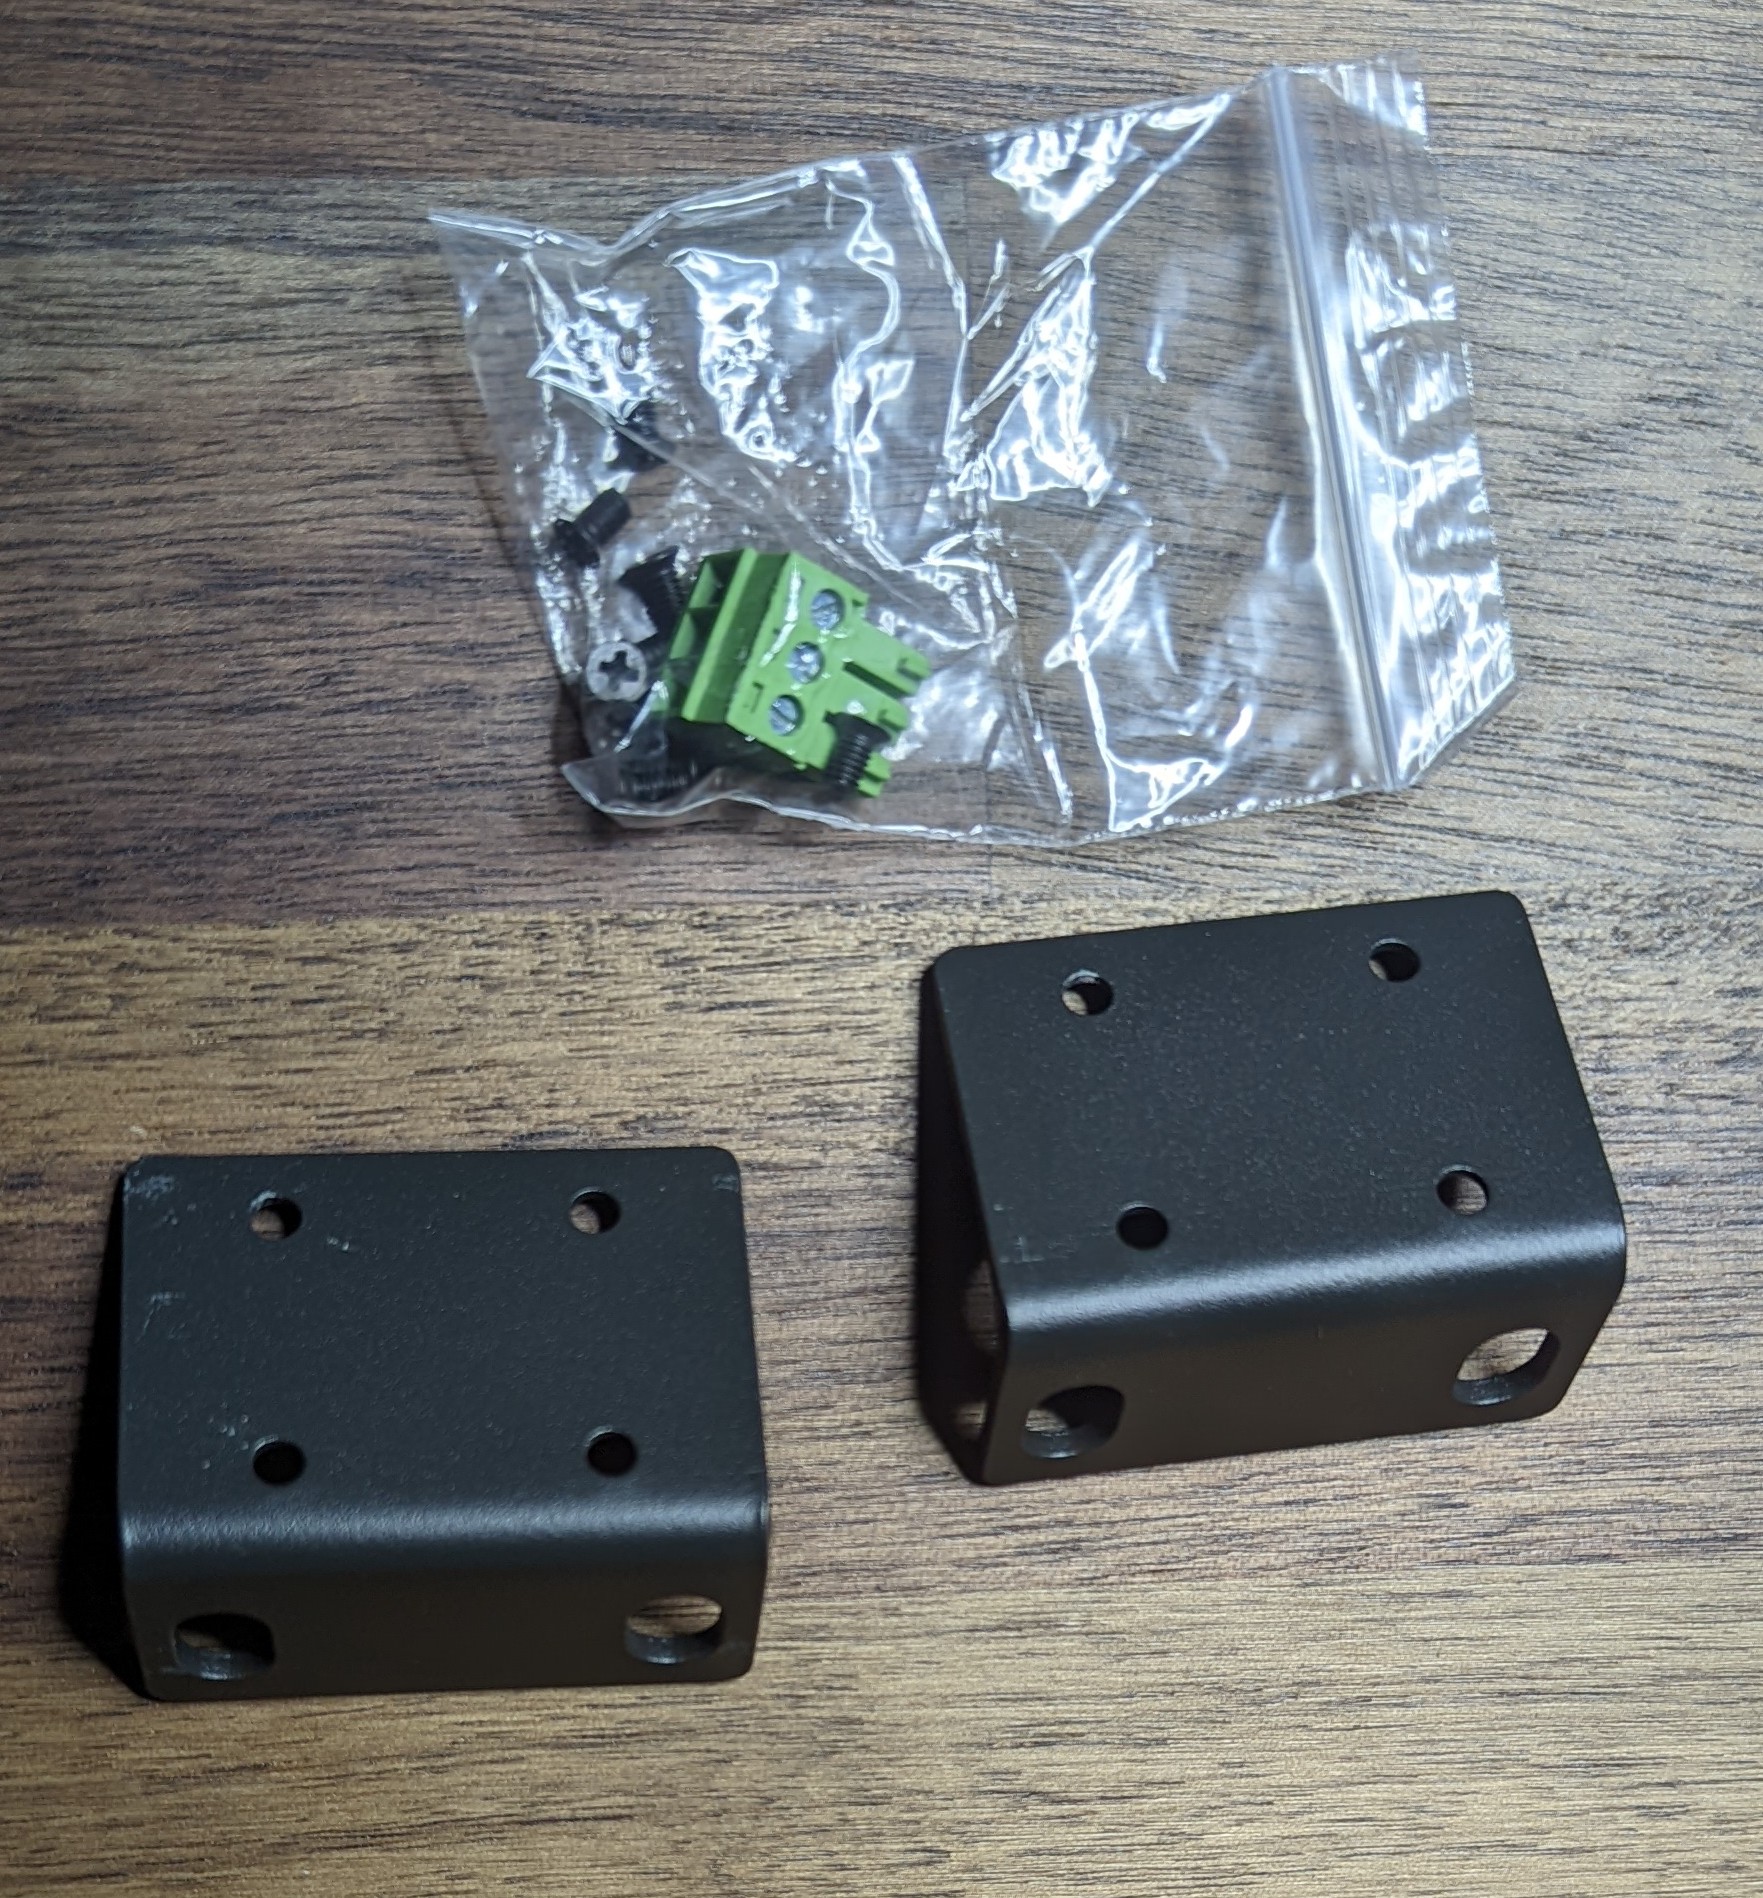 Rack Mount ears, two extra screws and the proper connector block needed to interface with the UART.